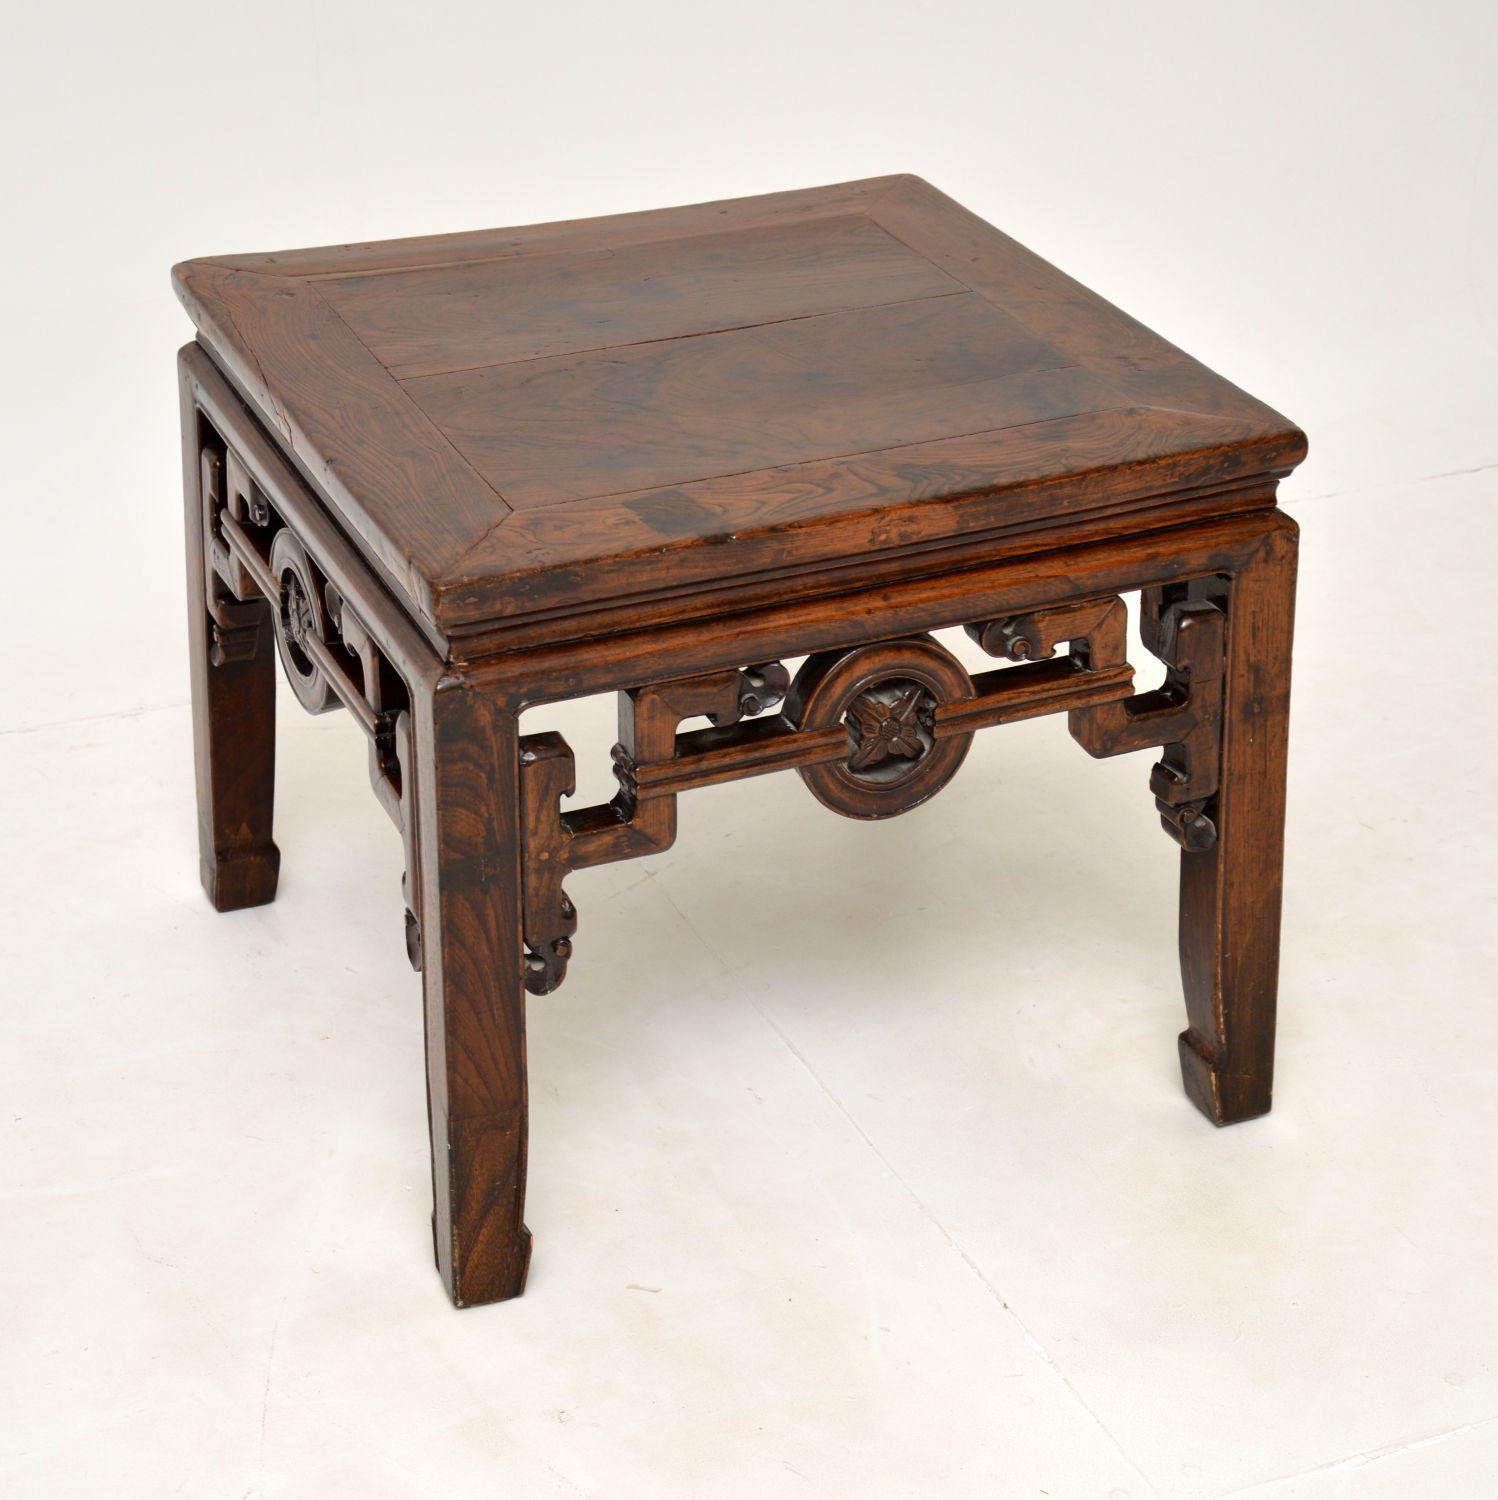 A wonderful original antique Chinese table in solid Elm. This was made in China around the 1880-1900 period.

It is of excellent quality, and has the original wax stamp on the inside leg to authenticate it is a genuine imported Chinese